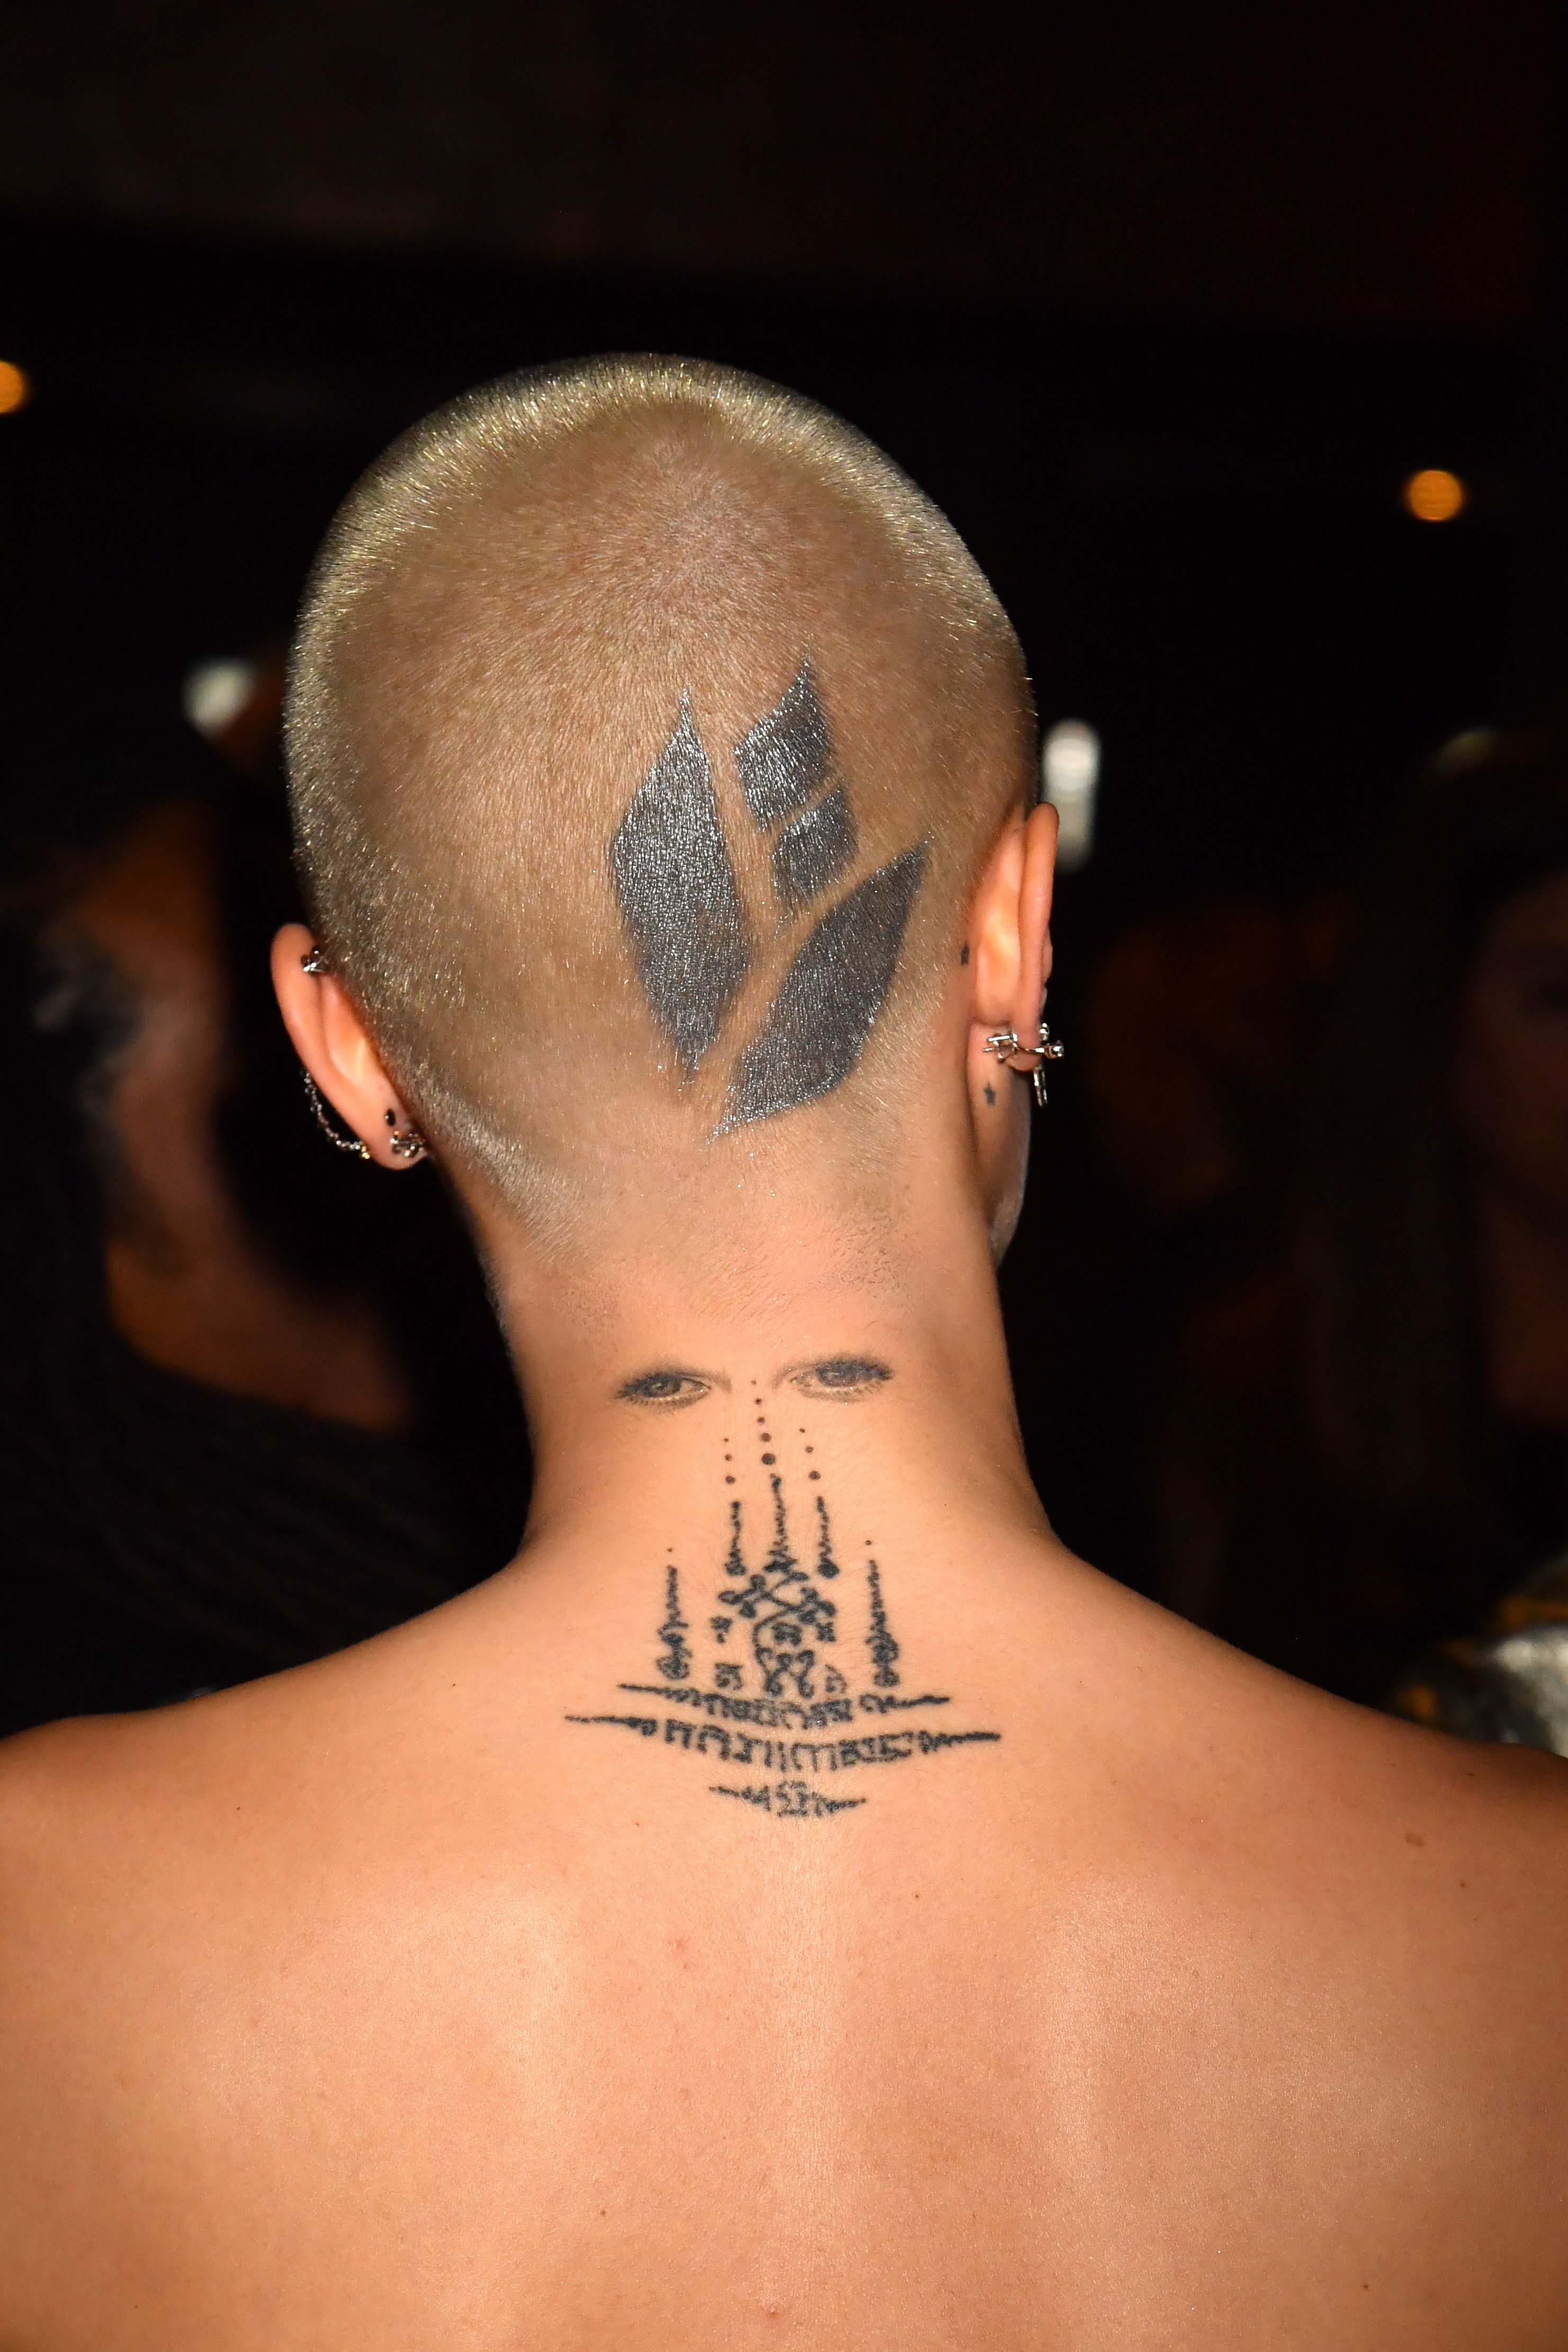 A Guide To Cara Delevingne's Tattoos (And Their Meanings)